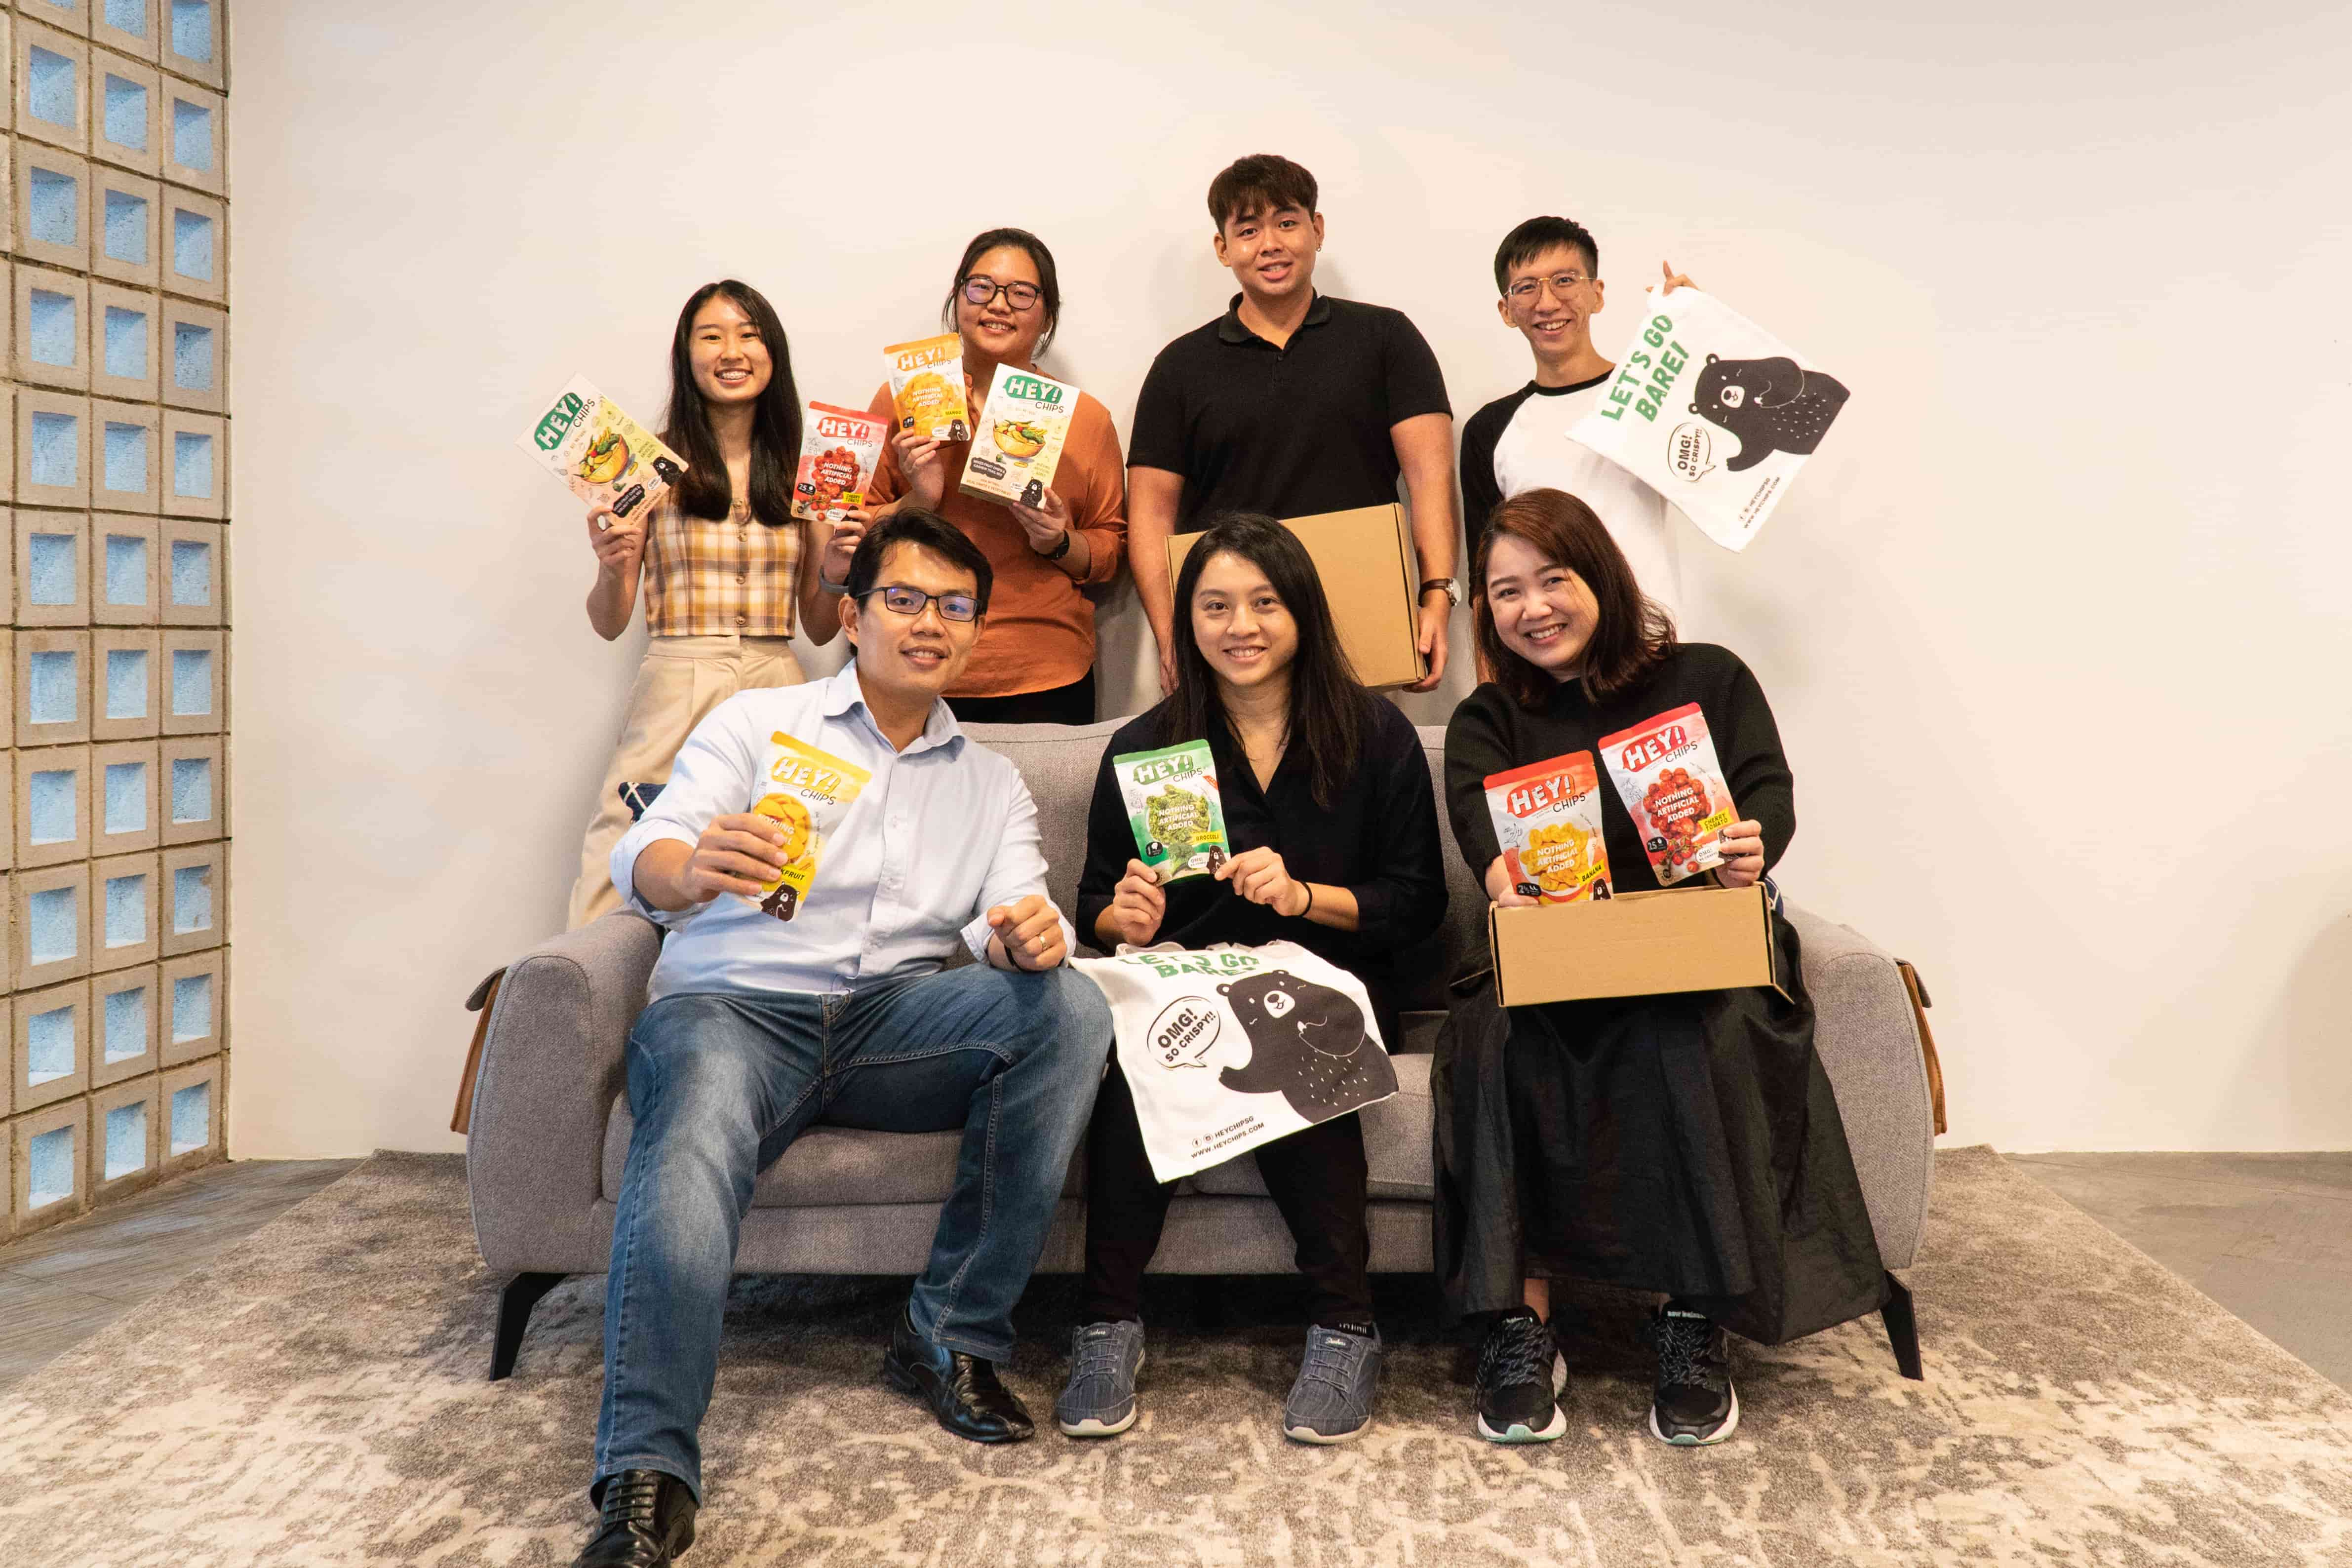 Healthy Snacking Soars Amid COVID: Local Start-up Hey! Chips Doubles Sales, Expands Offerings on Rising Demand